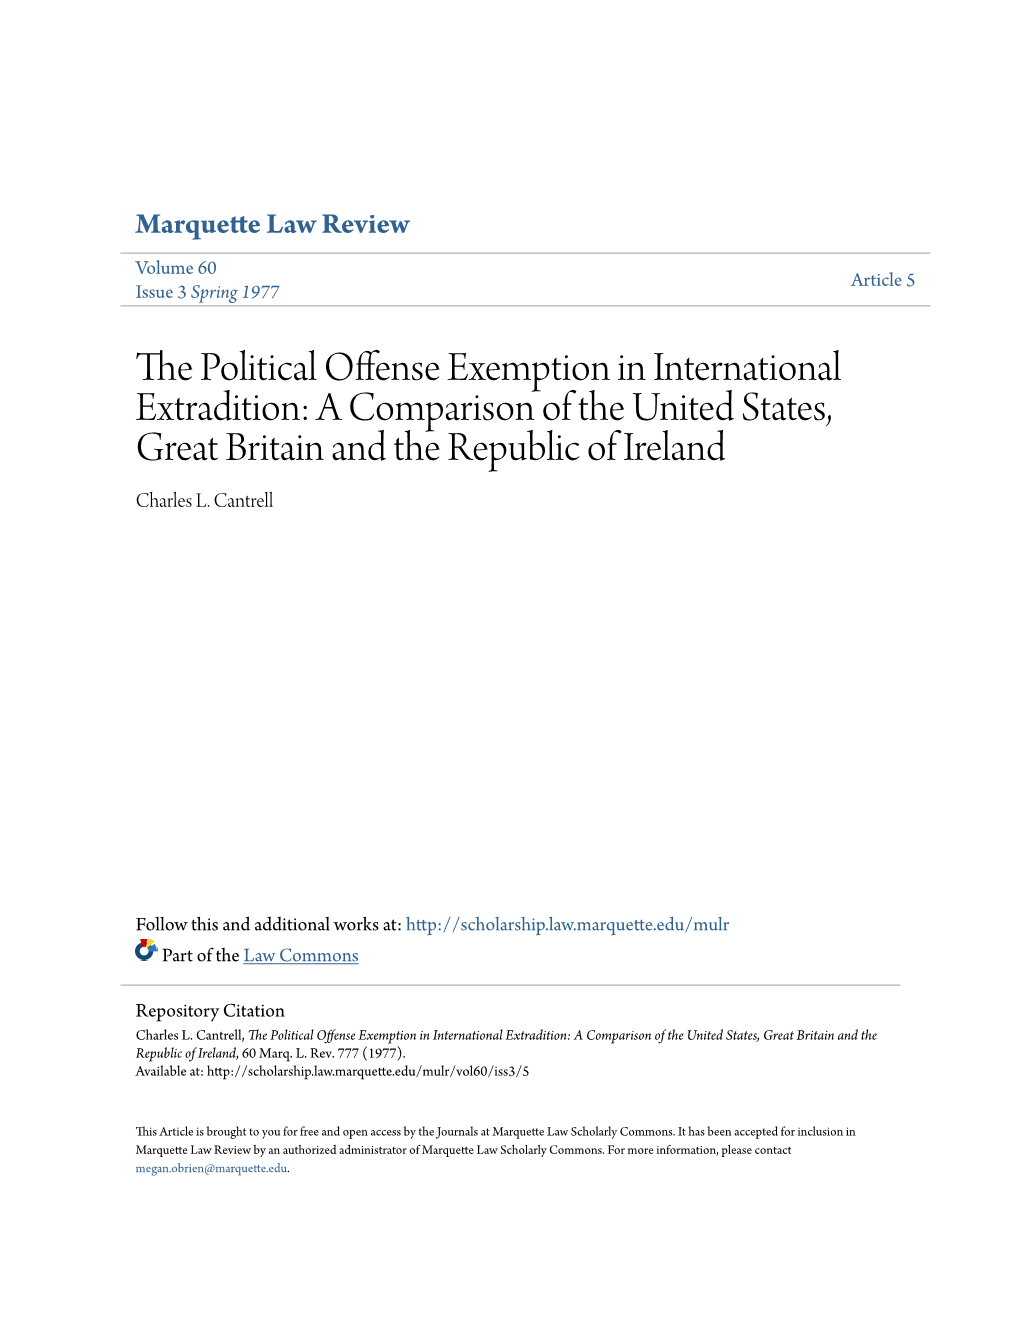 The Political Offense Exemption in International Extradition: a Comparison of the United States, Great Britain and the Republic of Ireland, 60 Marq